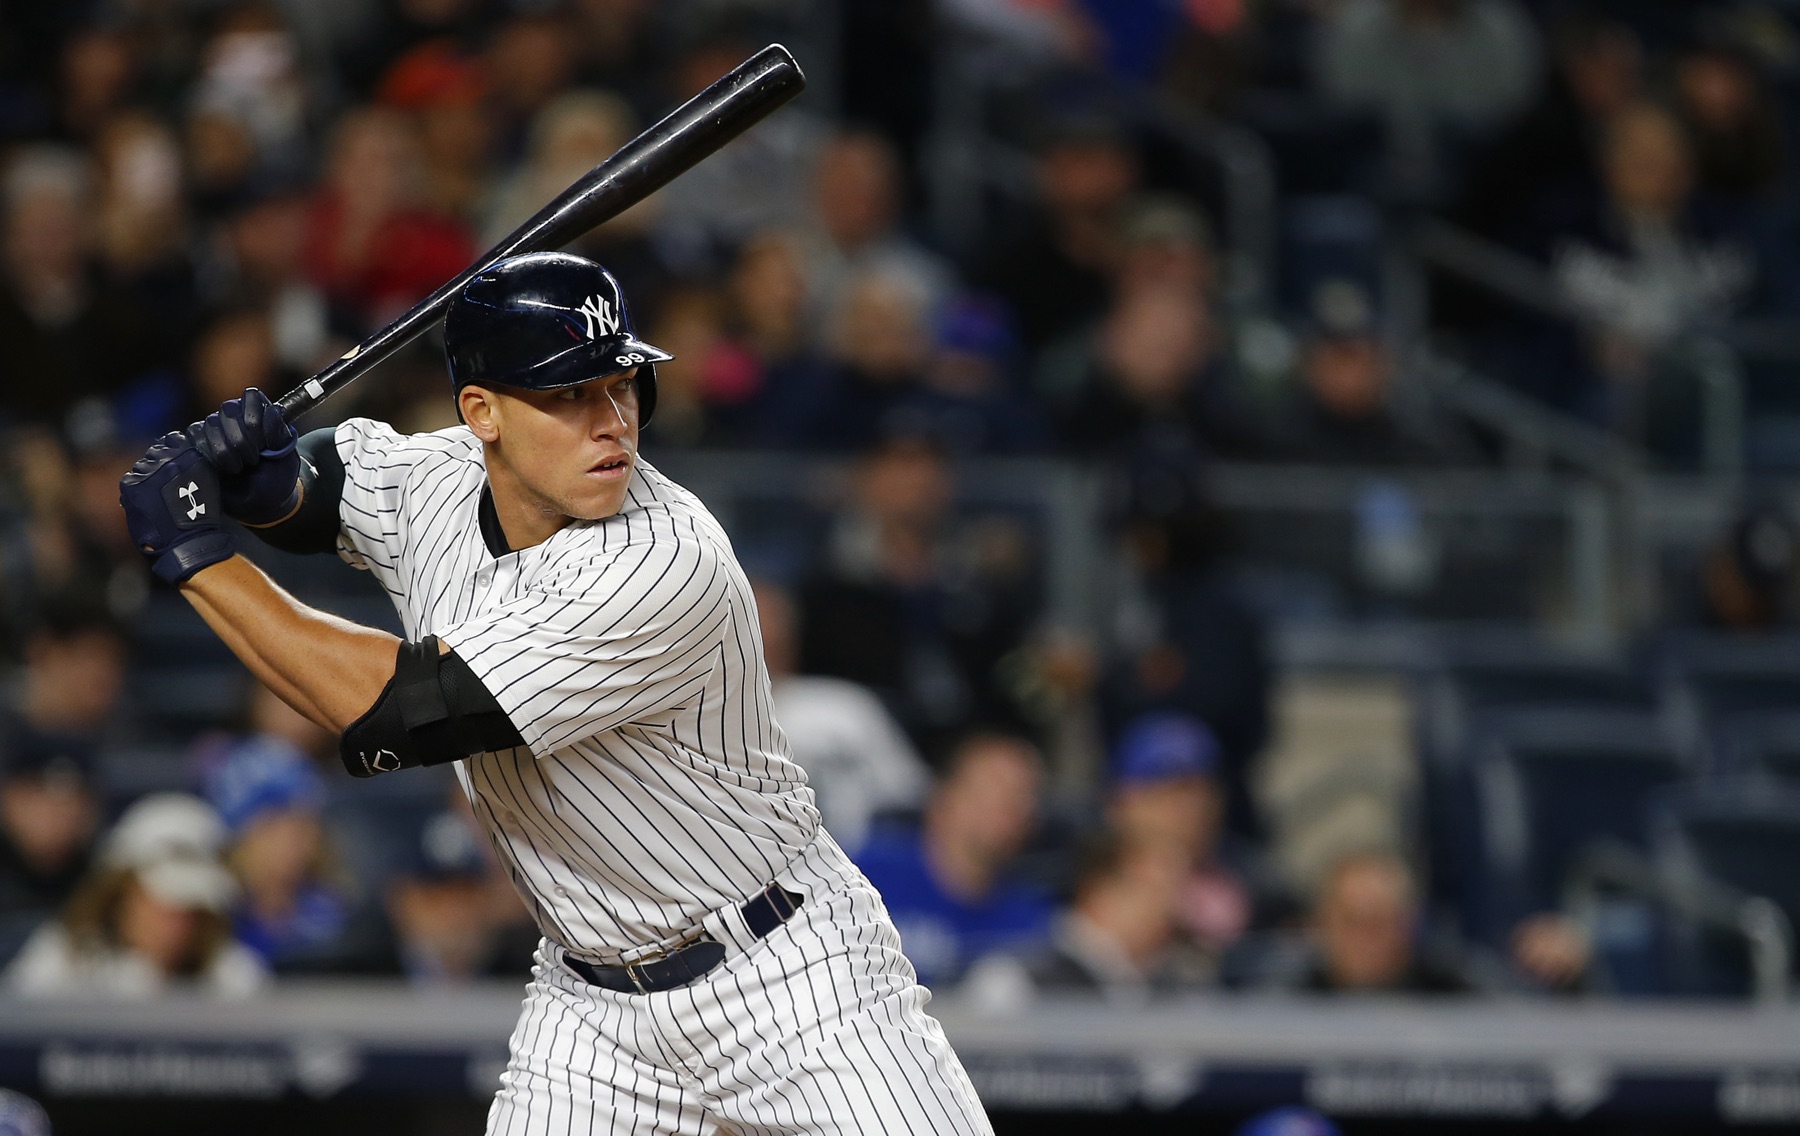 Aaron Judge of the New York Yankees in action against the Toronto Blue Jays at Yankee Stadium on May 3.